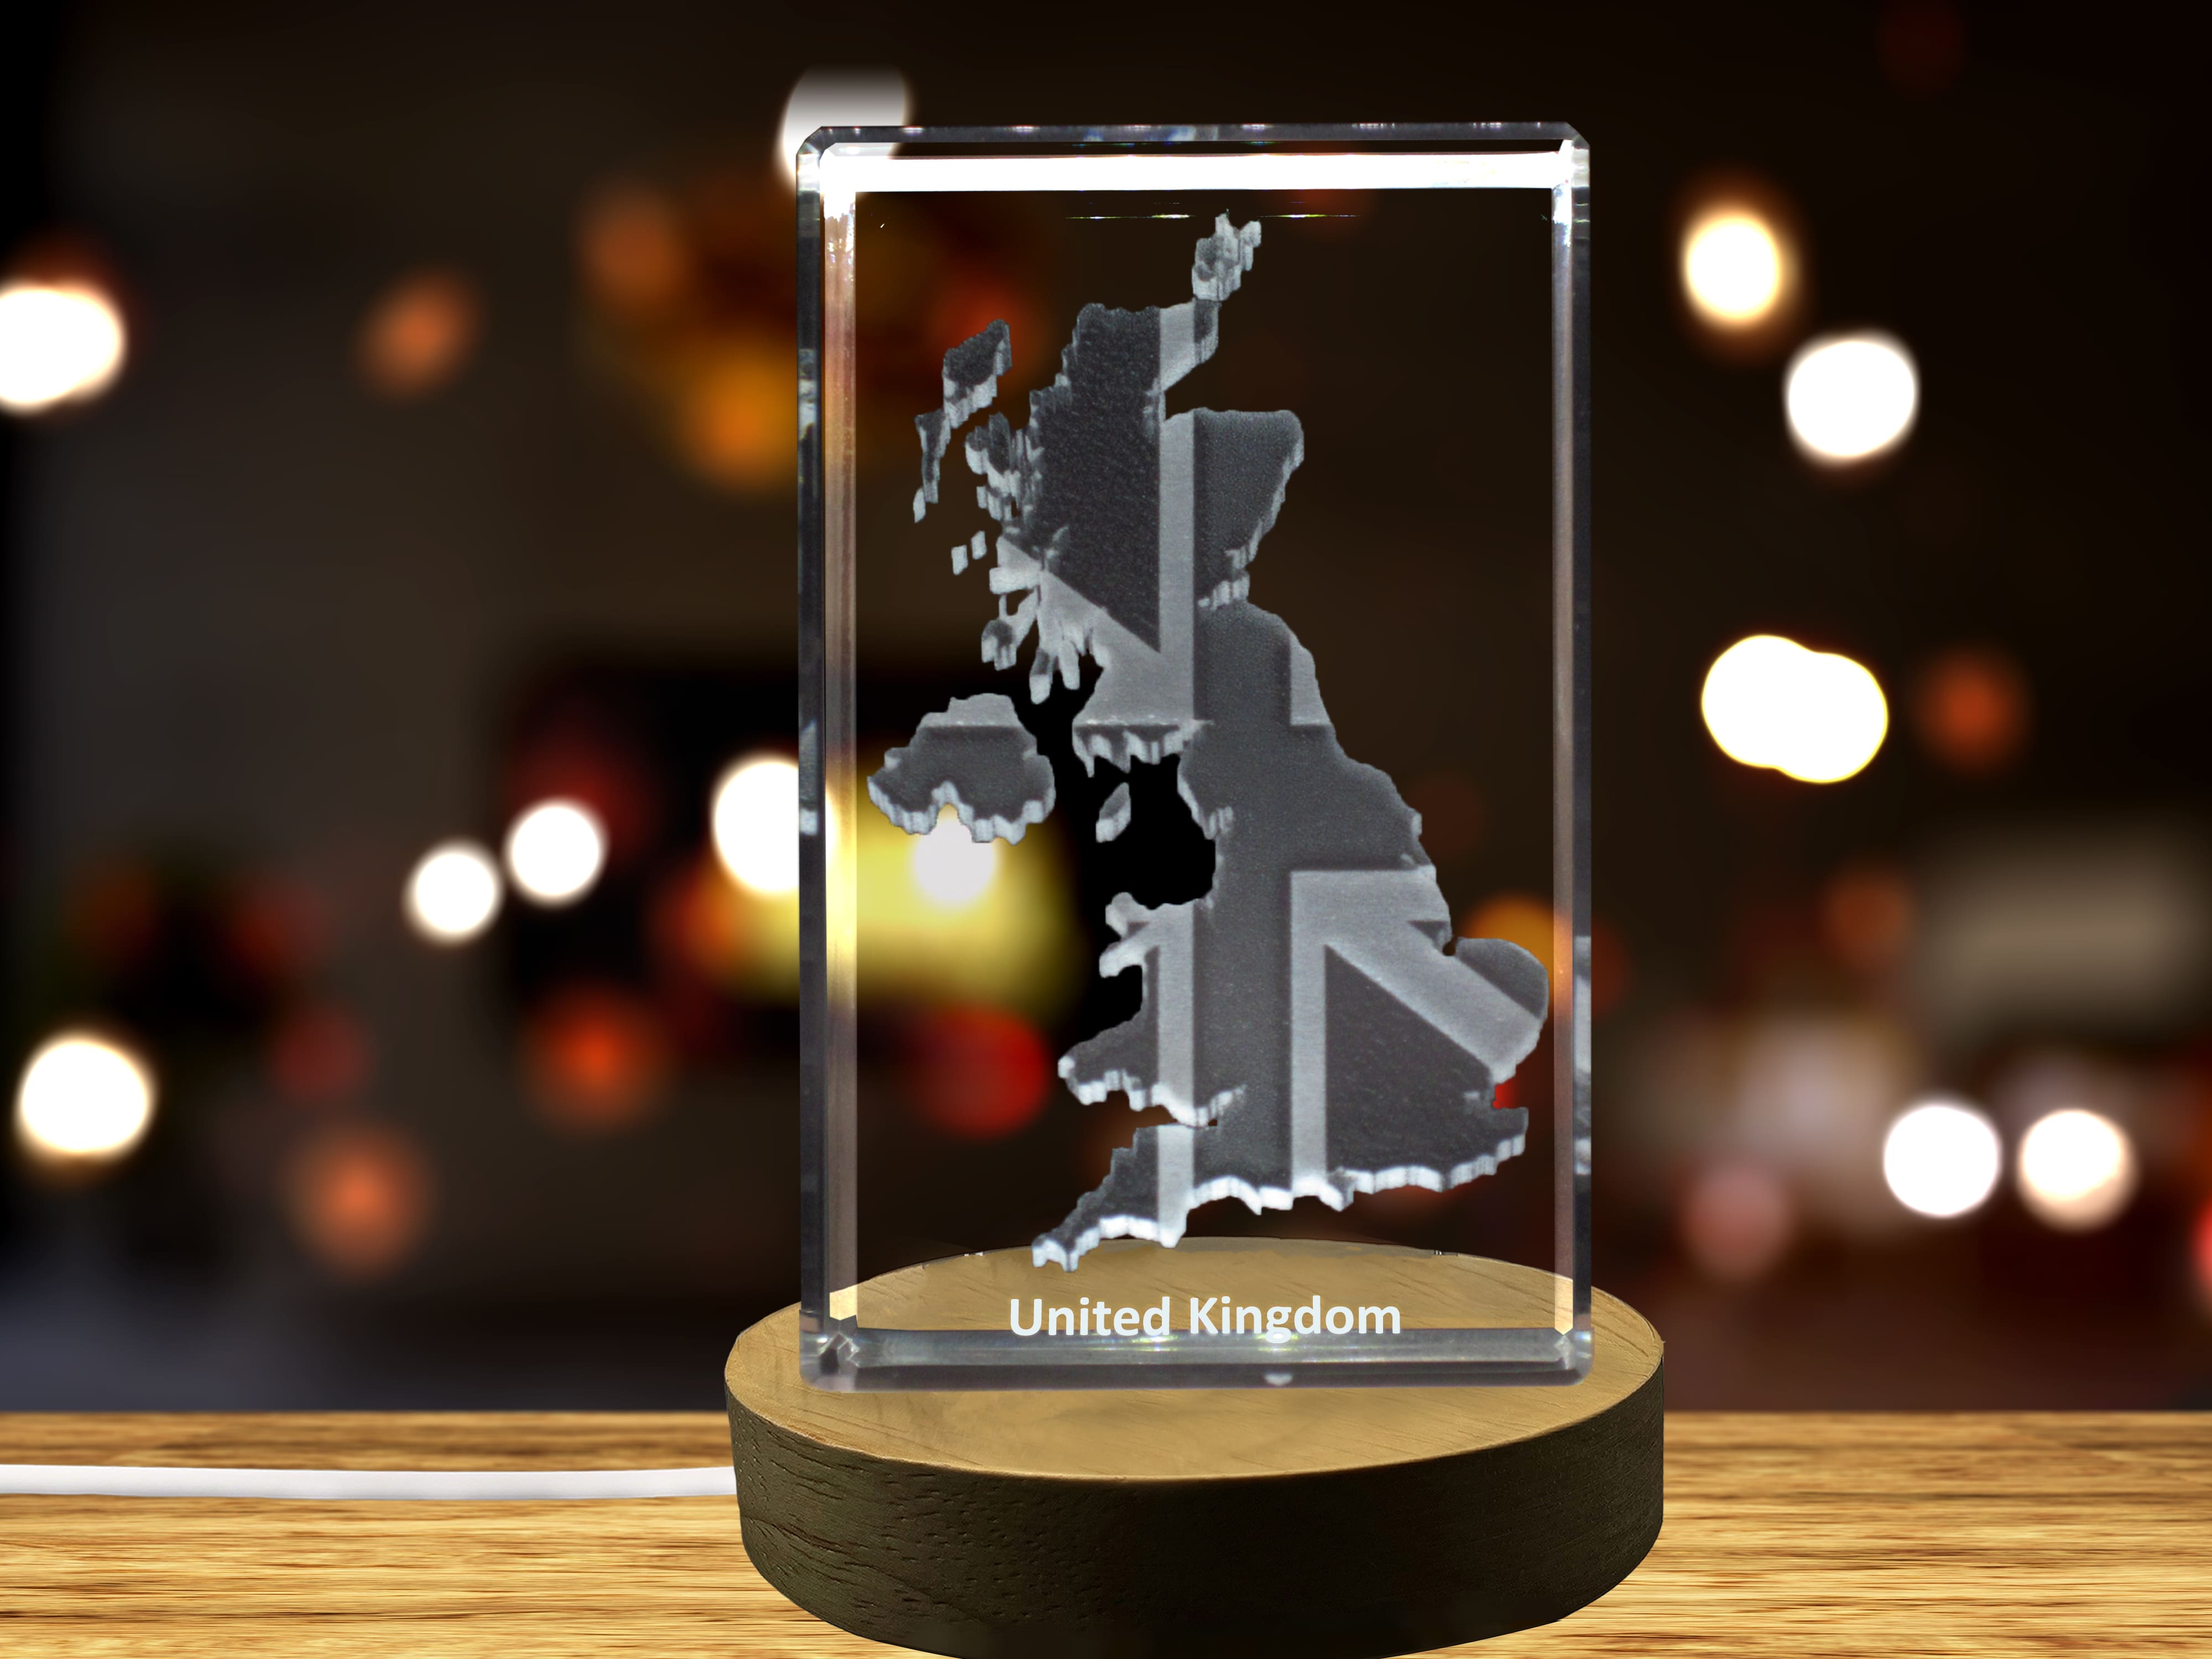 United Kingdom 3D Engraved Crystal 3D Engraved Crystal Keepsake/Gift/Decor/Collectible/Souvenir A&B Crystal Collection